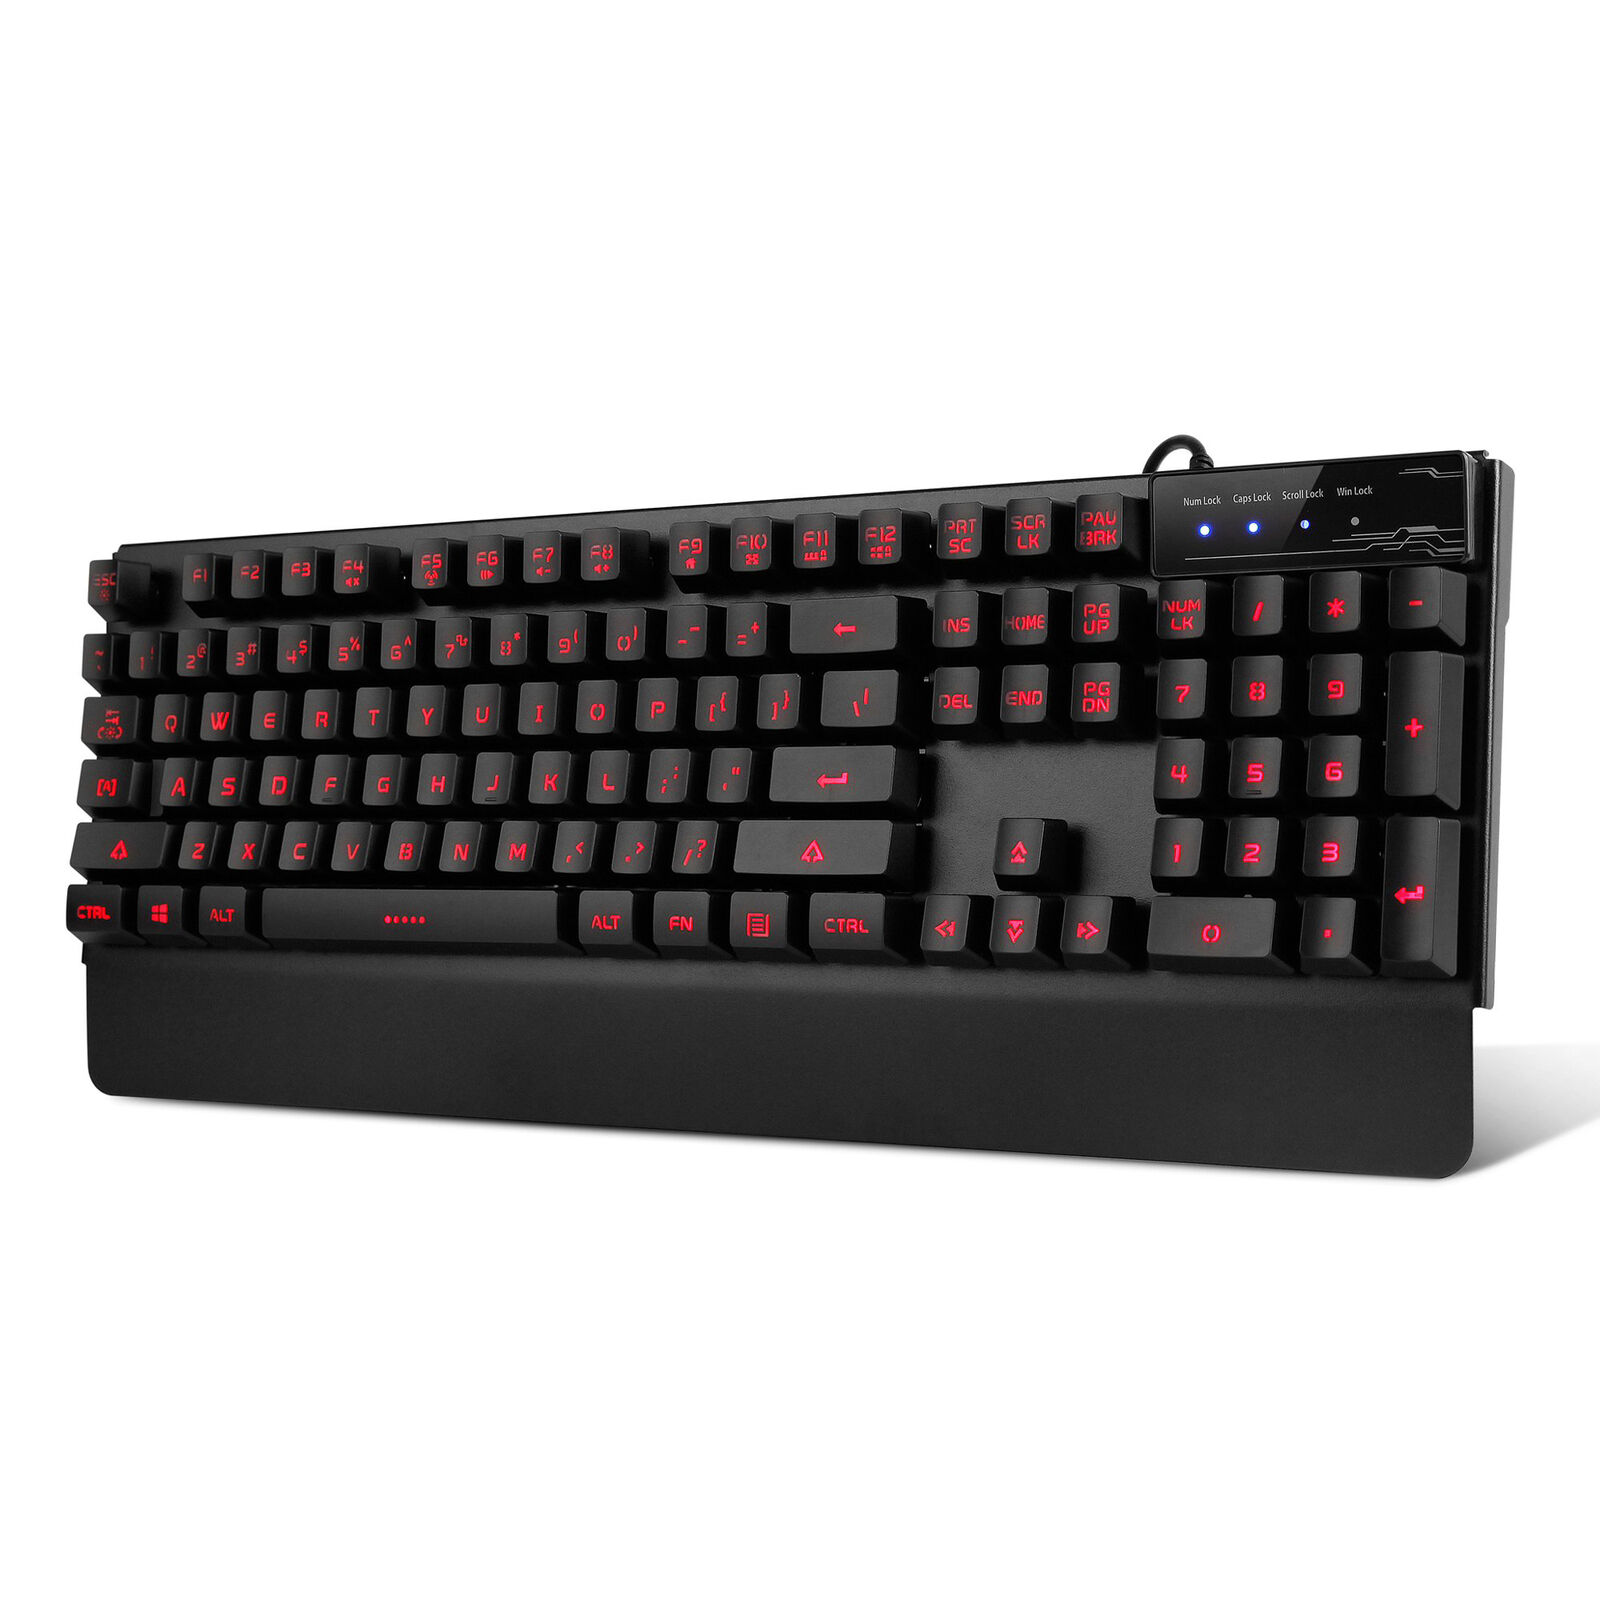 Gaming Keyboard with 3 Color LED Backlit, USB Wired Keyboard with Wrist Rest